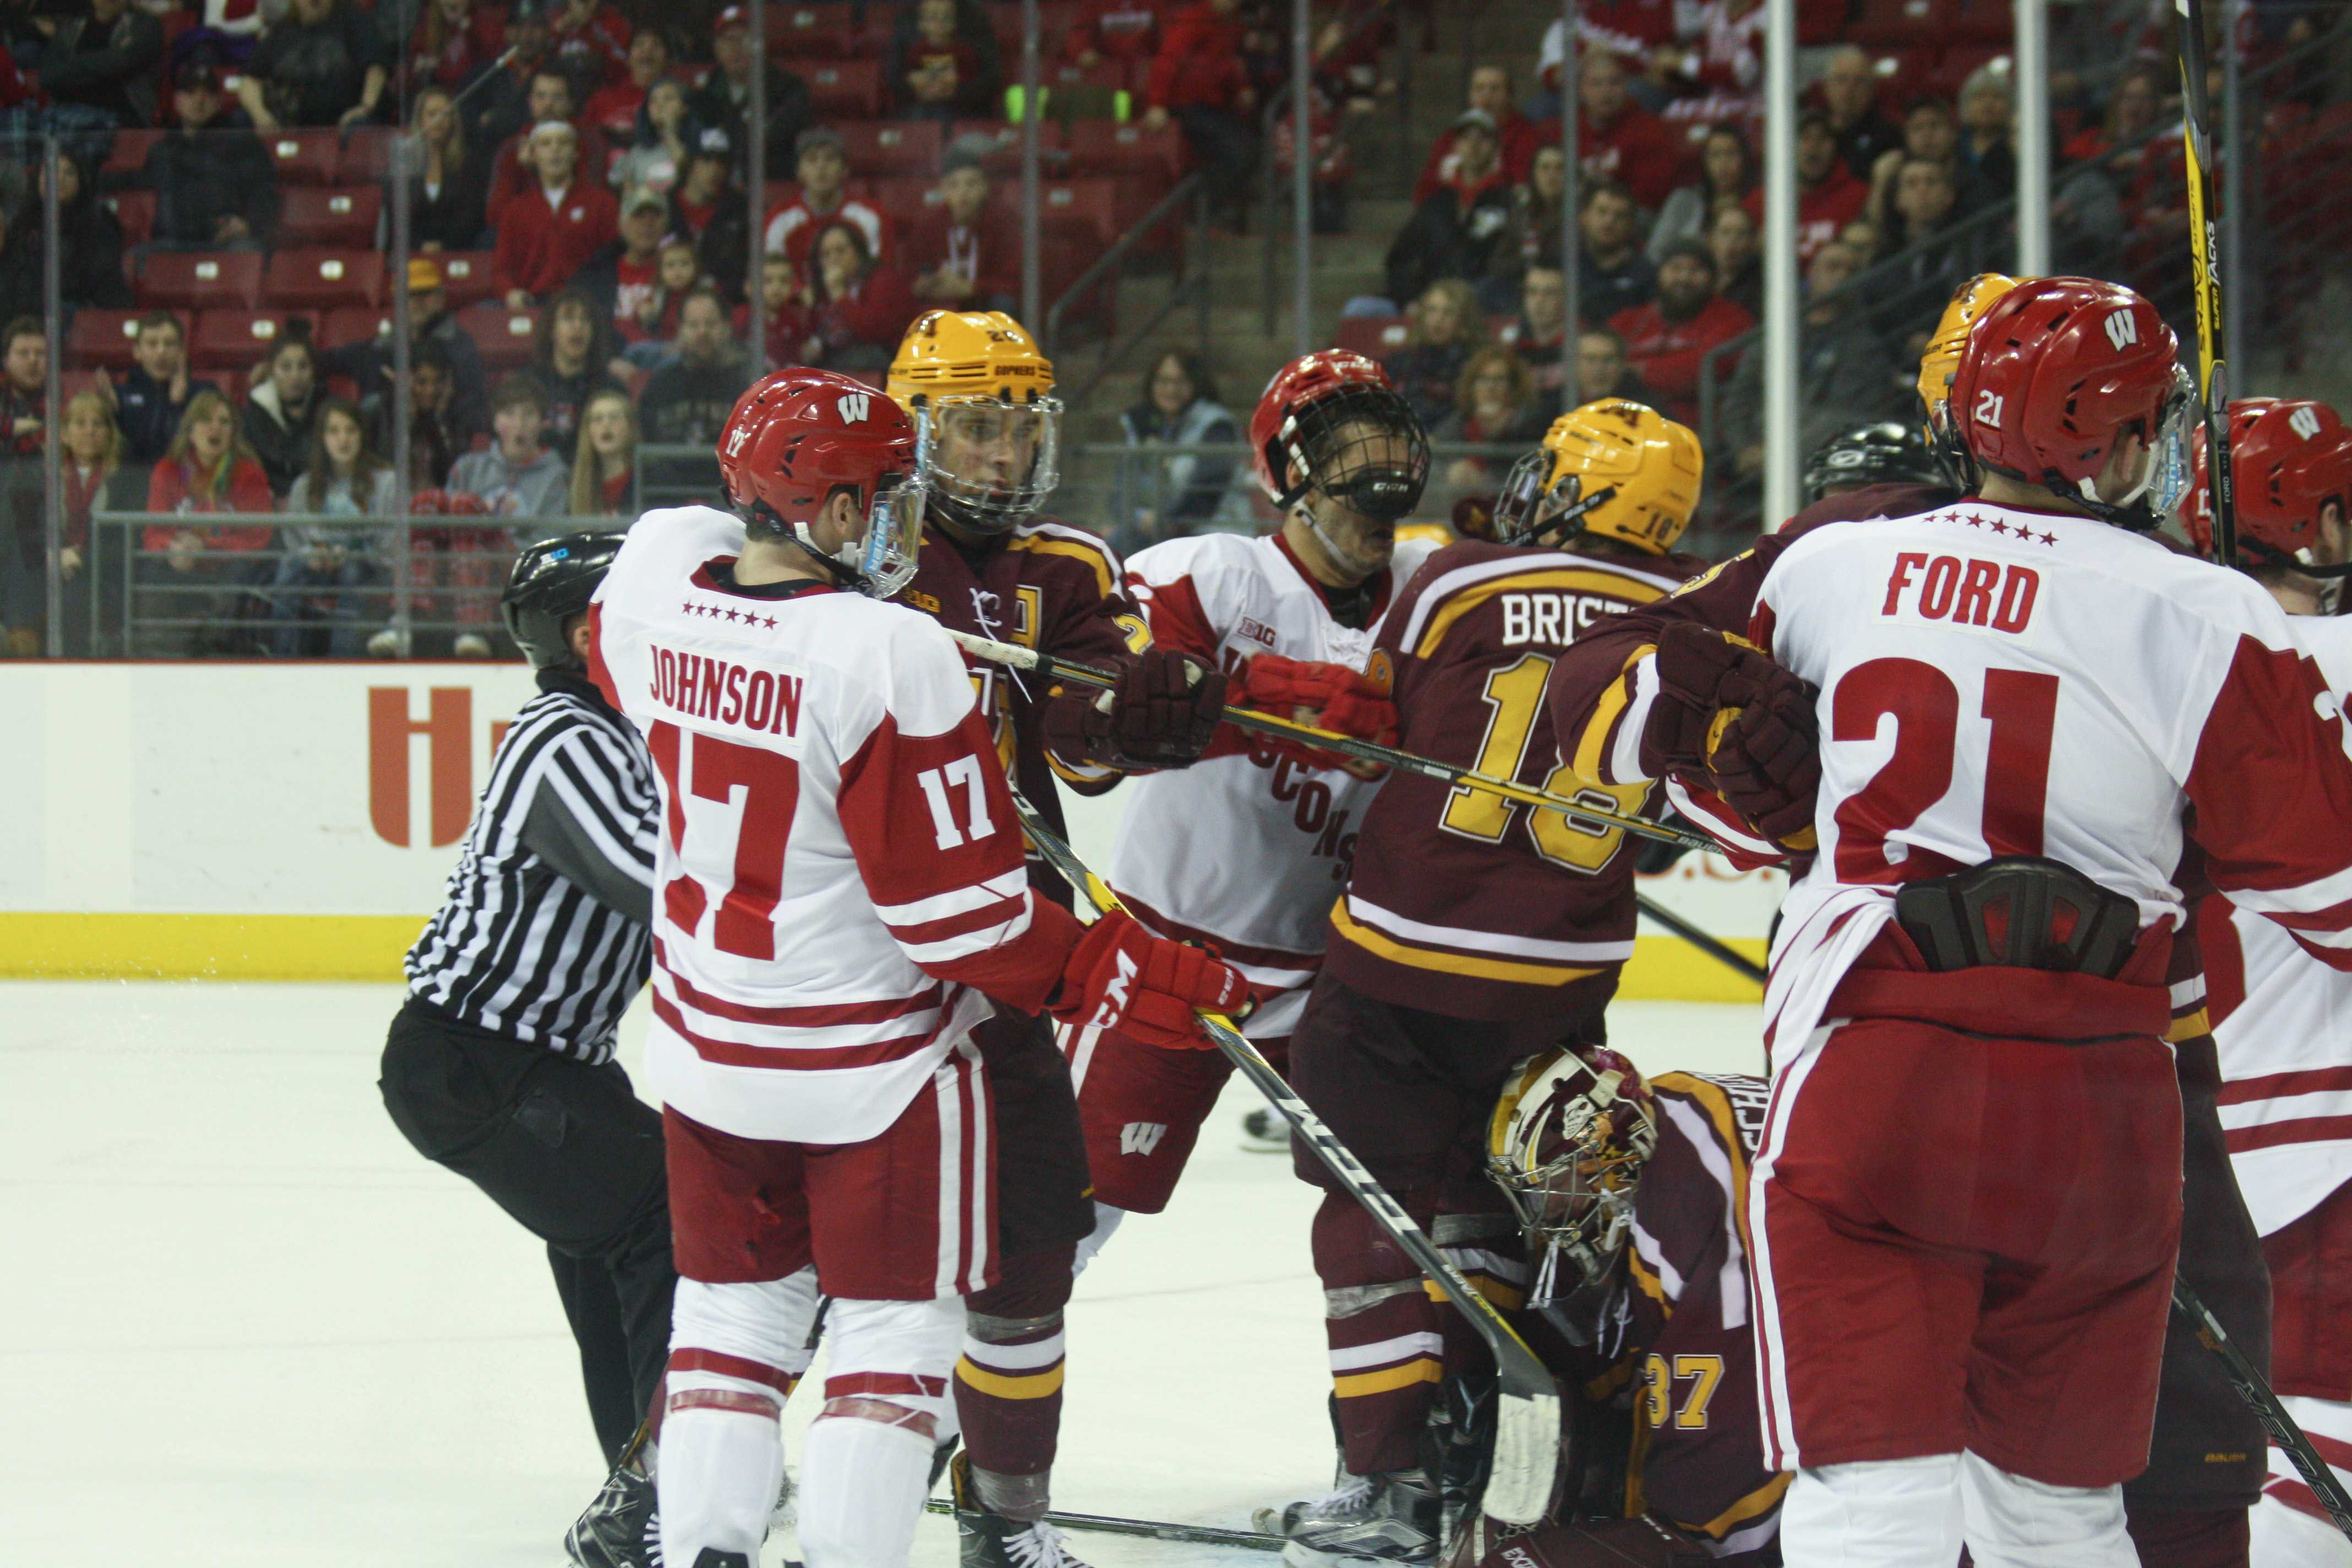 Men's hockey Badgers look to ride momentum from Border Battle into